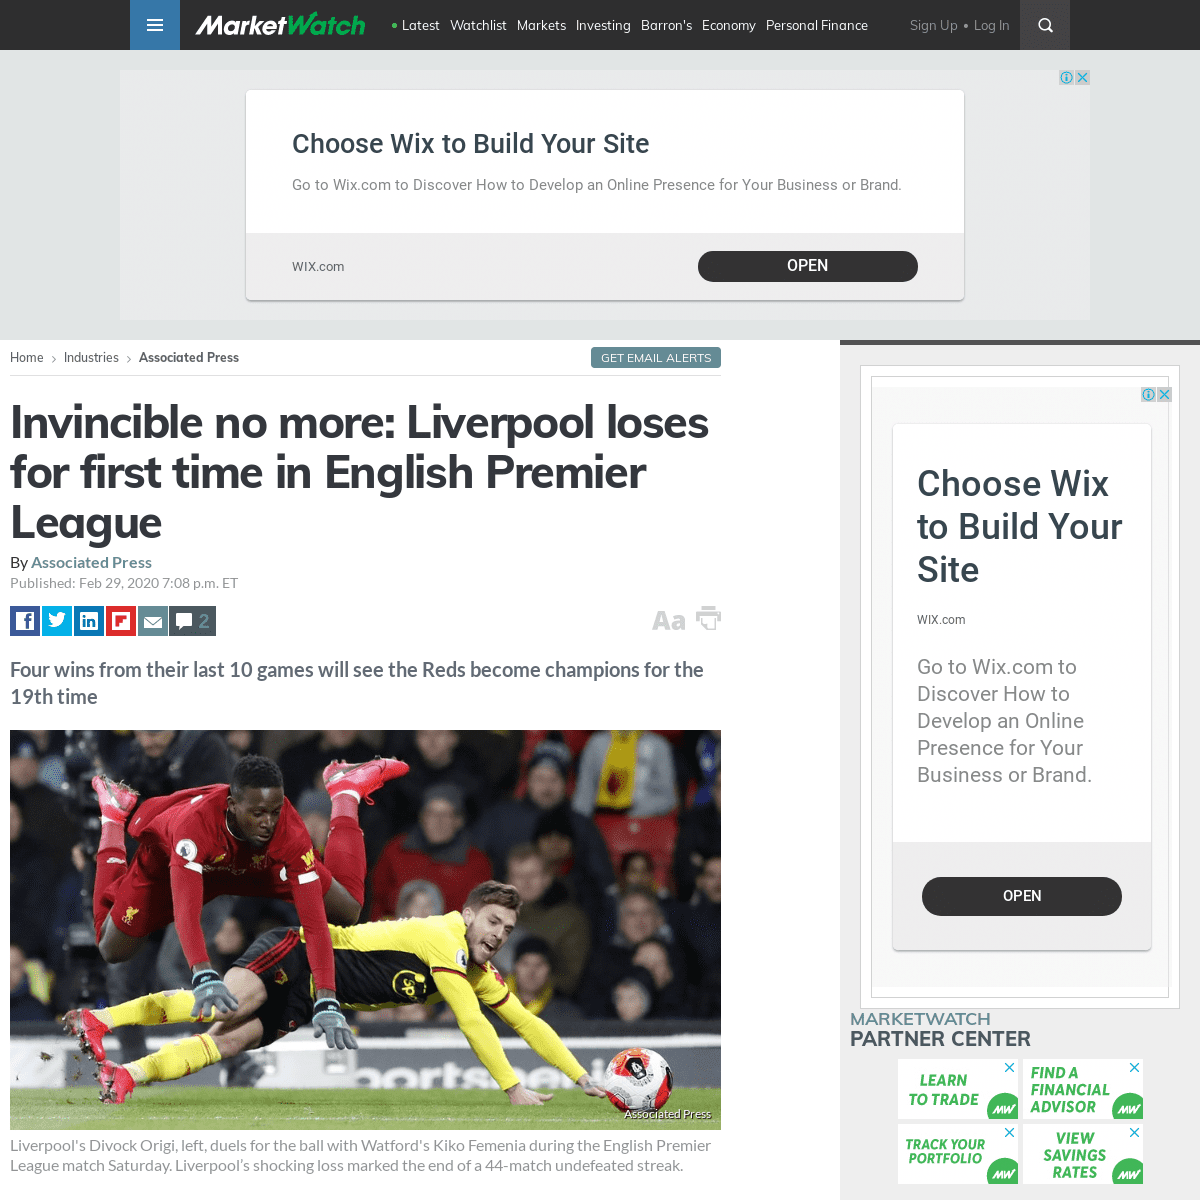 A complete backup of www.marketwatch.com/story/invincible-no-more-liverpool-loses-for-first-time-in-english-premier-league-2020-